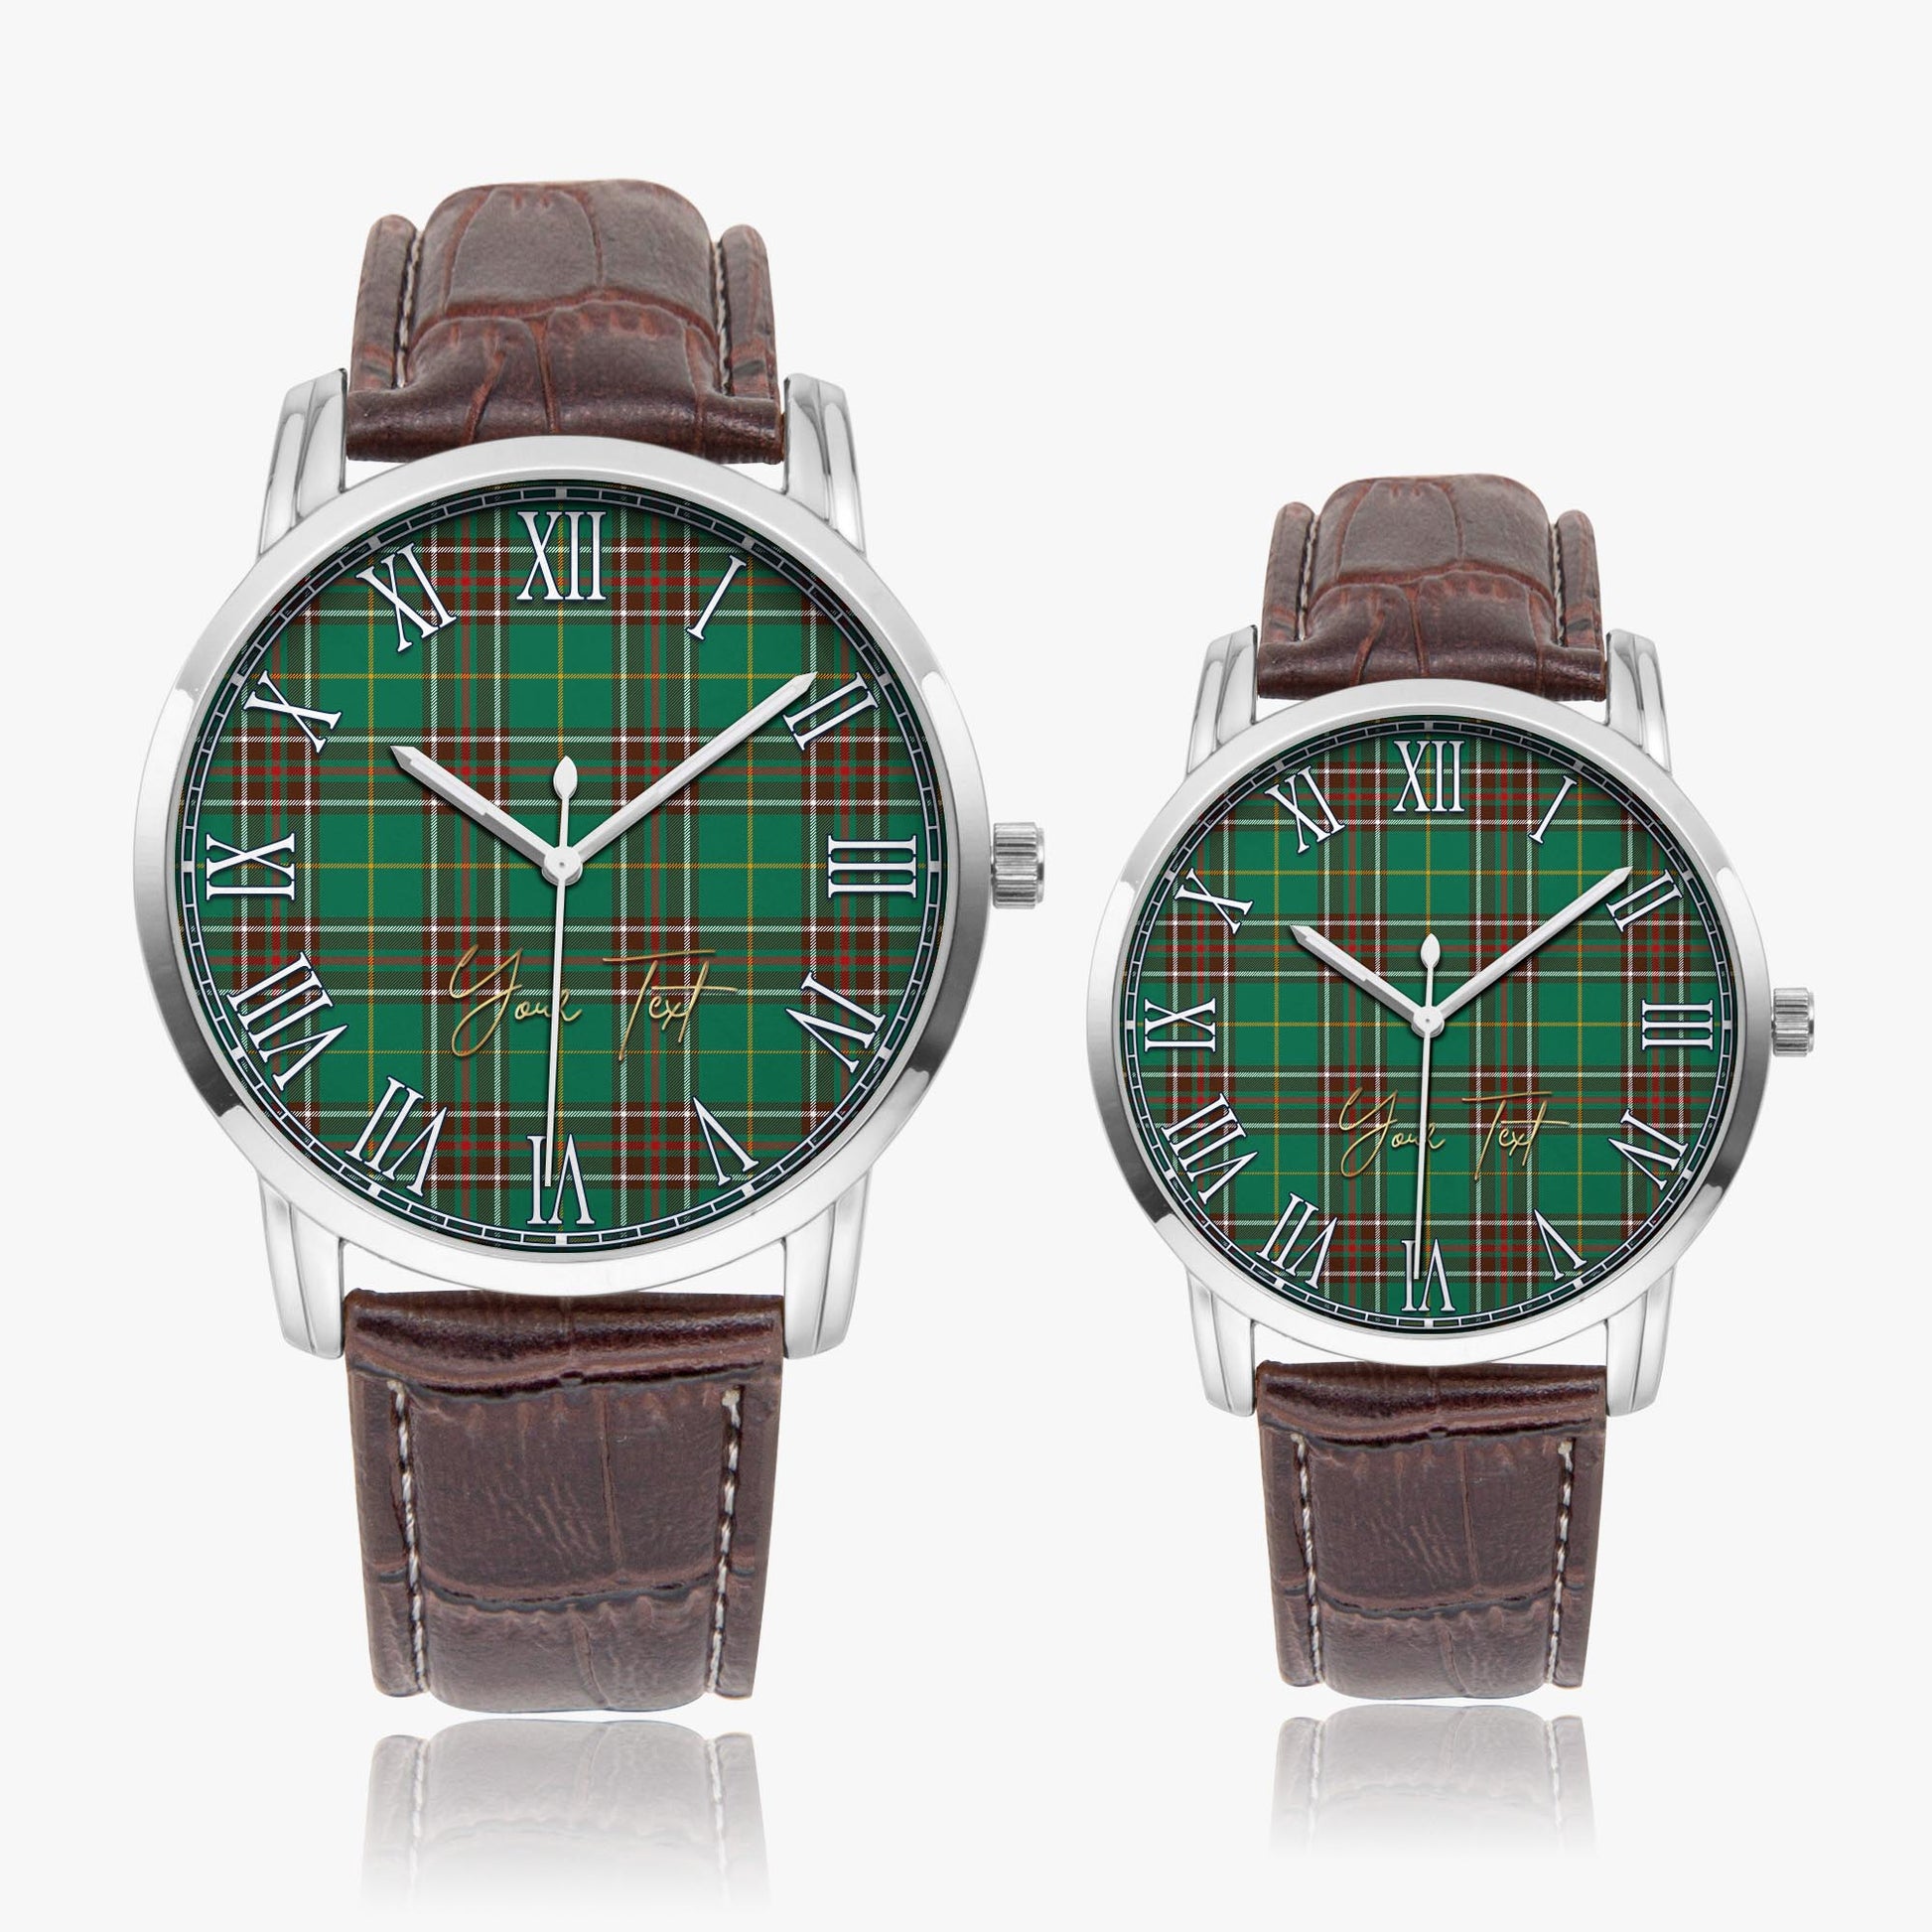 Newfoundland And Labrador Province Canada Tartan Personalized Your Text Leather Trap Quartz Watch Wide Type Silver Case With Brown Leather Strap - Tartanvibesclothing